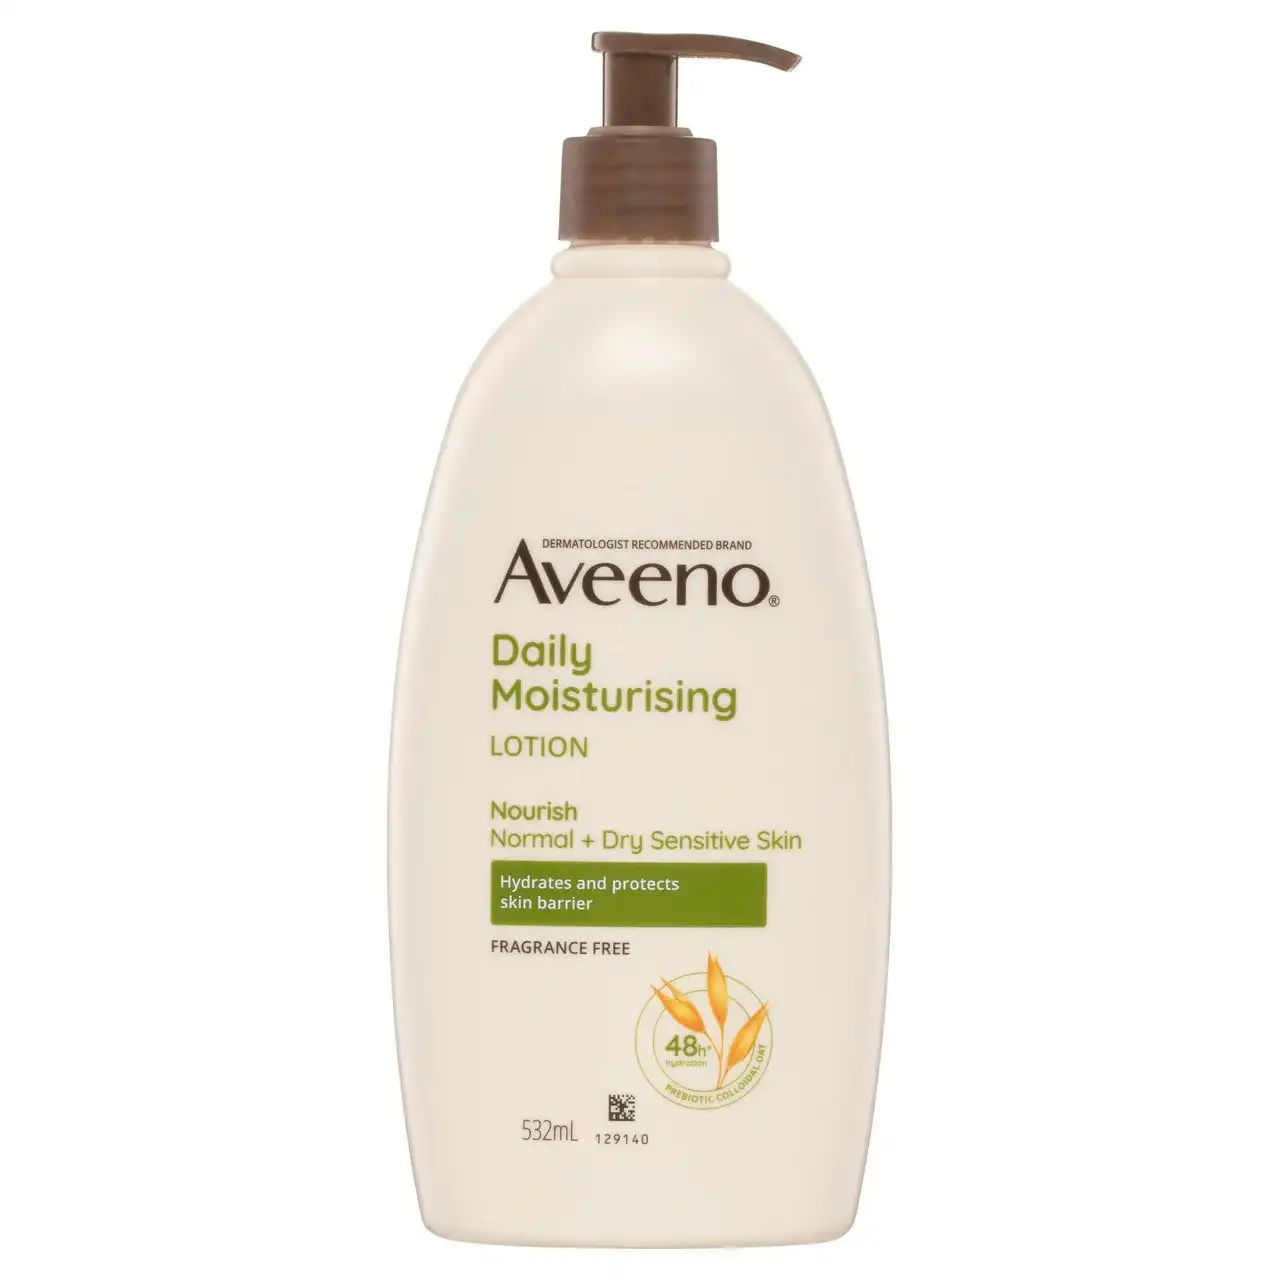 Aveeno Daily Moisturising Non-Greasy Fragrance Free Body Lotion 48-Hour Hydration Soothe Normal Dry Sensitive Skin 532mL